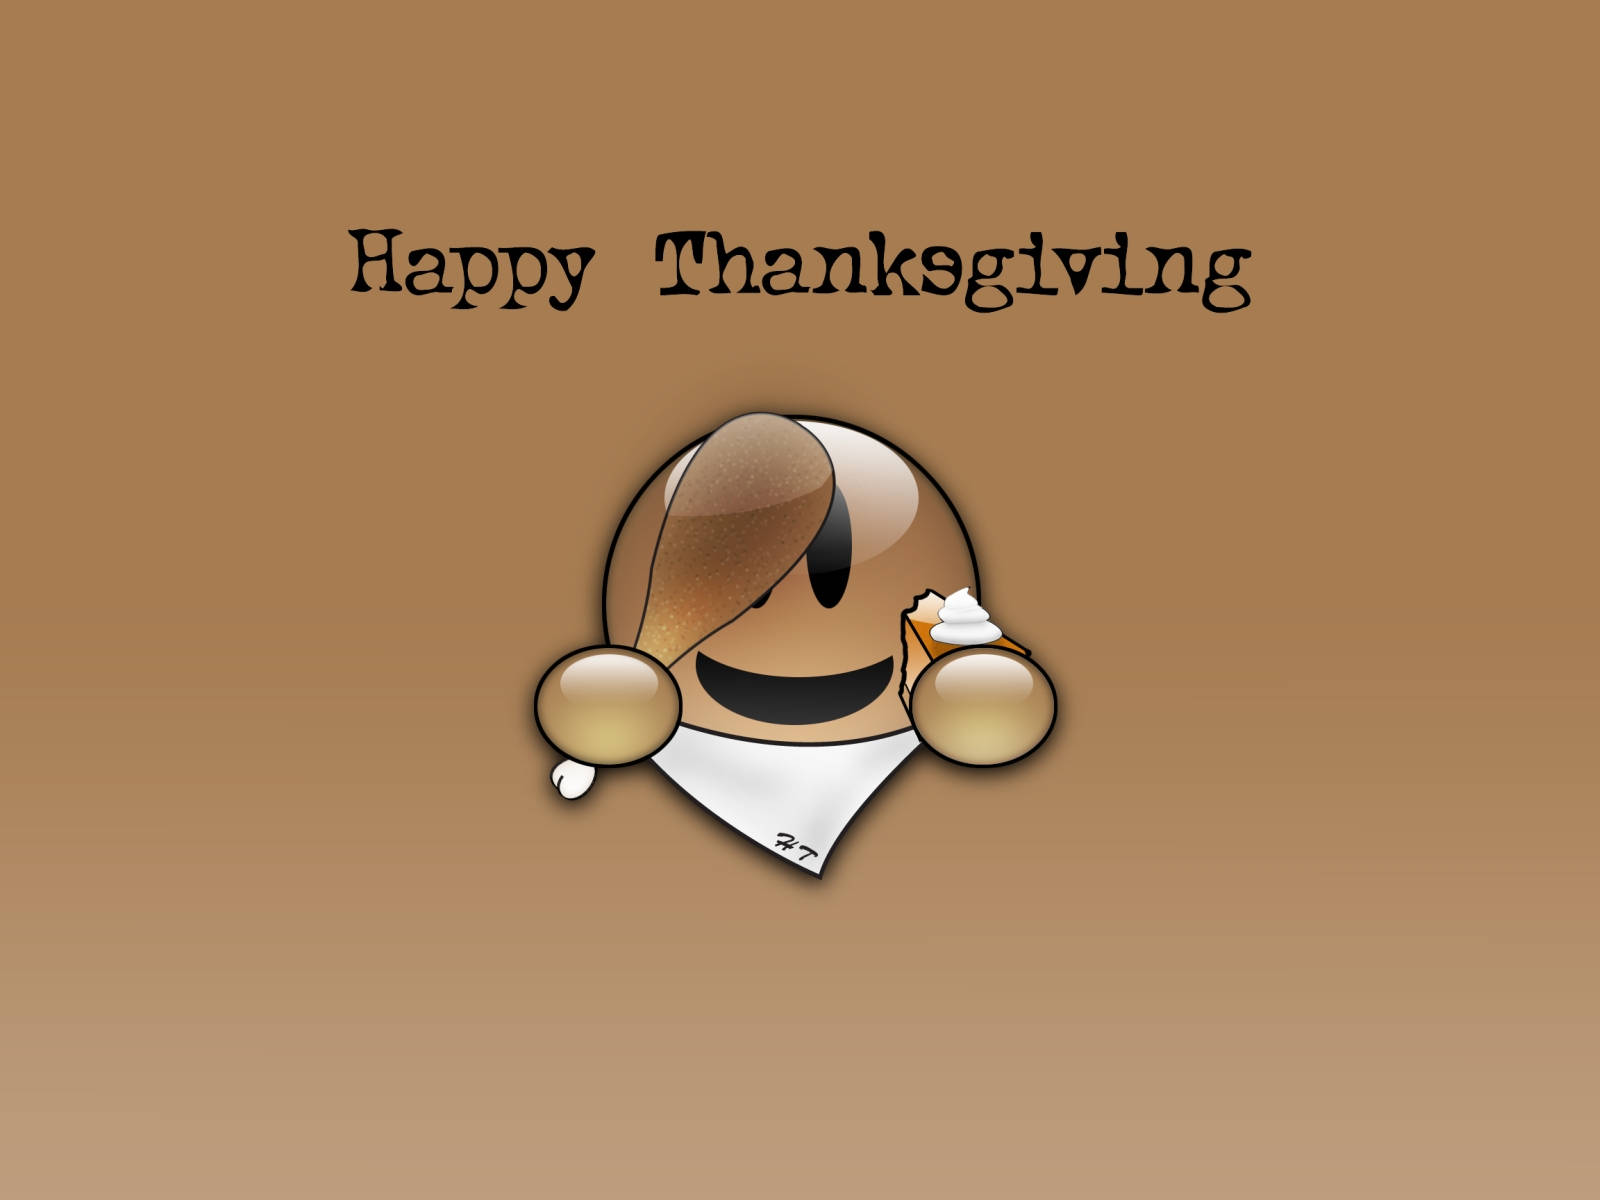 100+] Cute Thanksgiving Wallpapers